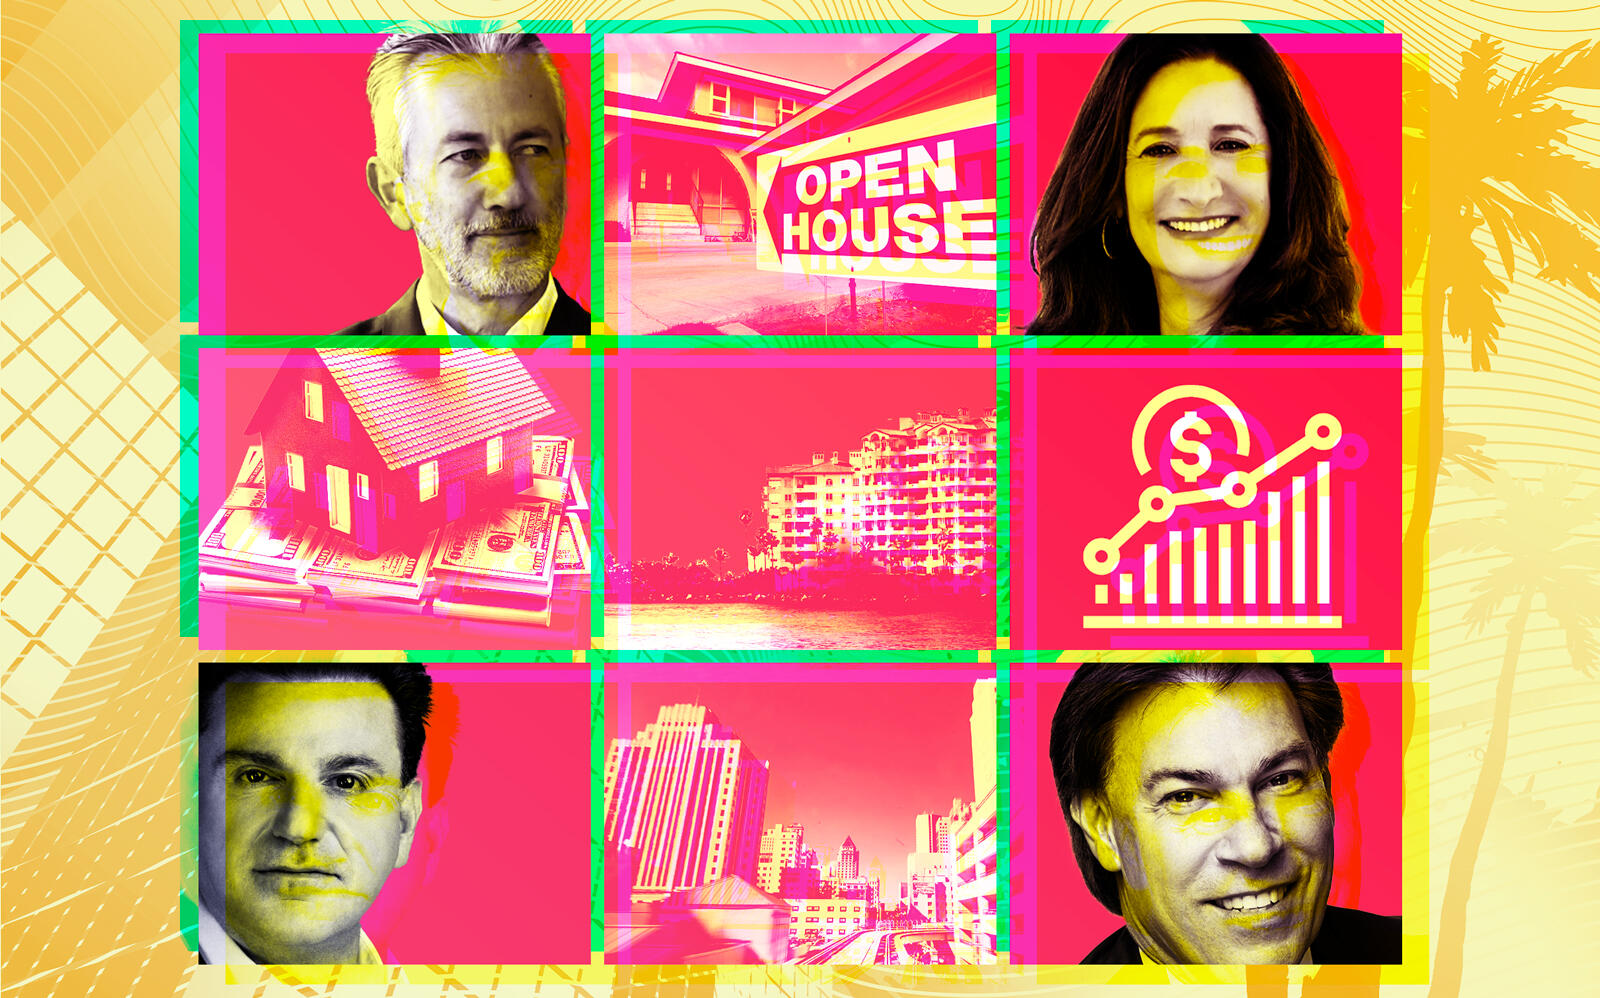 Clockwise from top left: One Sotheby’s Jorge Uribe, Compass' Ida Schwartz, Fortune International Group's Edgardo Defortuna and Royal Palm Companies' Dan Kodsi (Illustration by Kevin Rebong for The Real Deal)